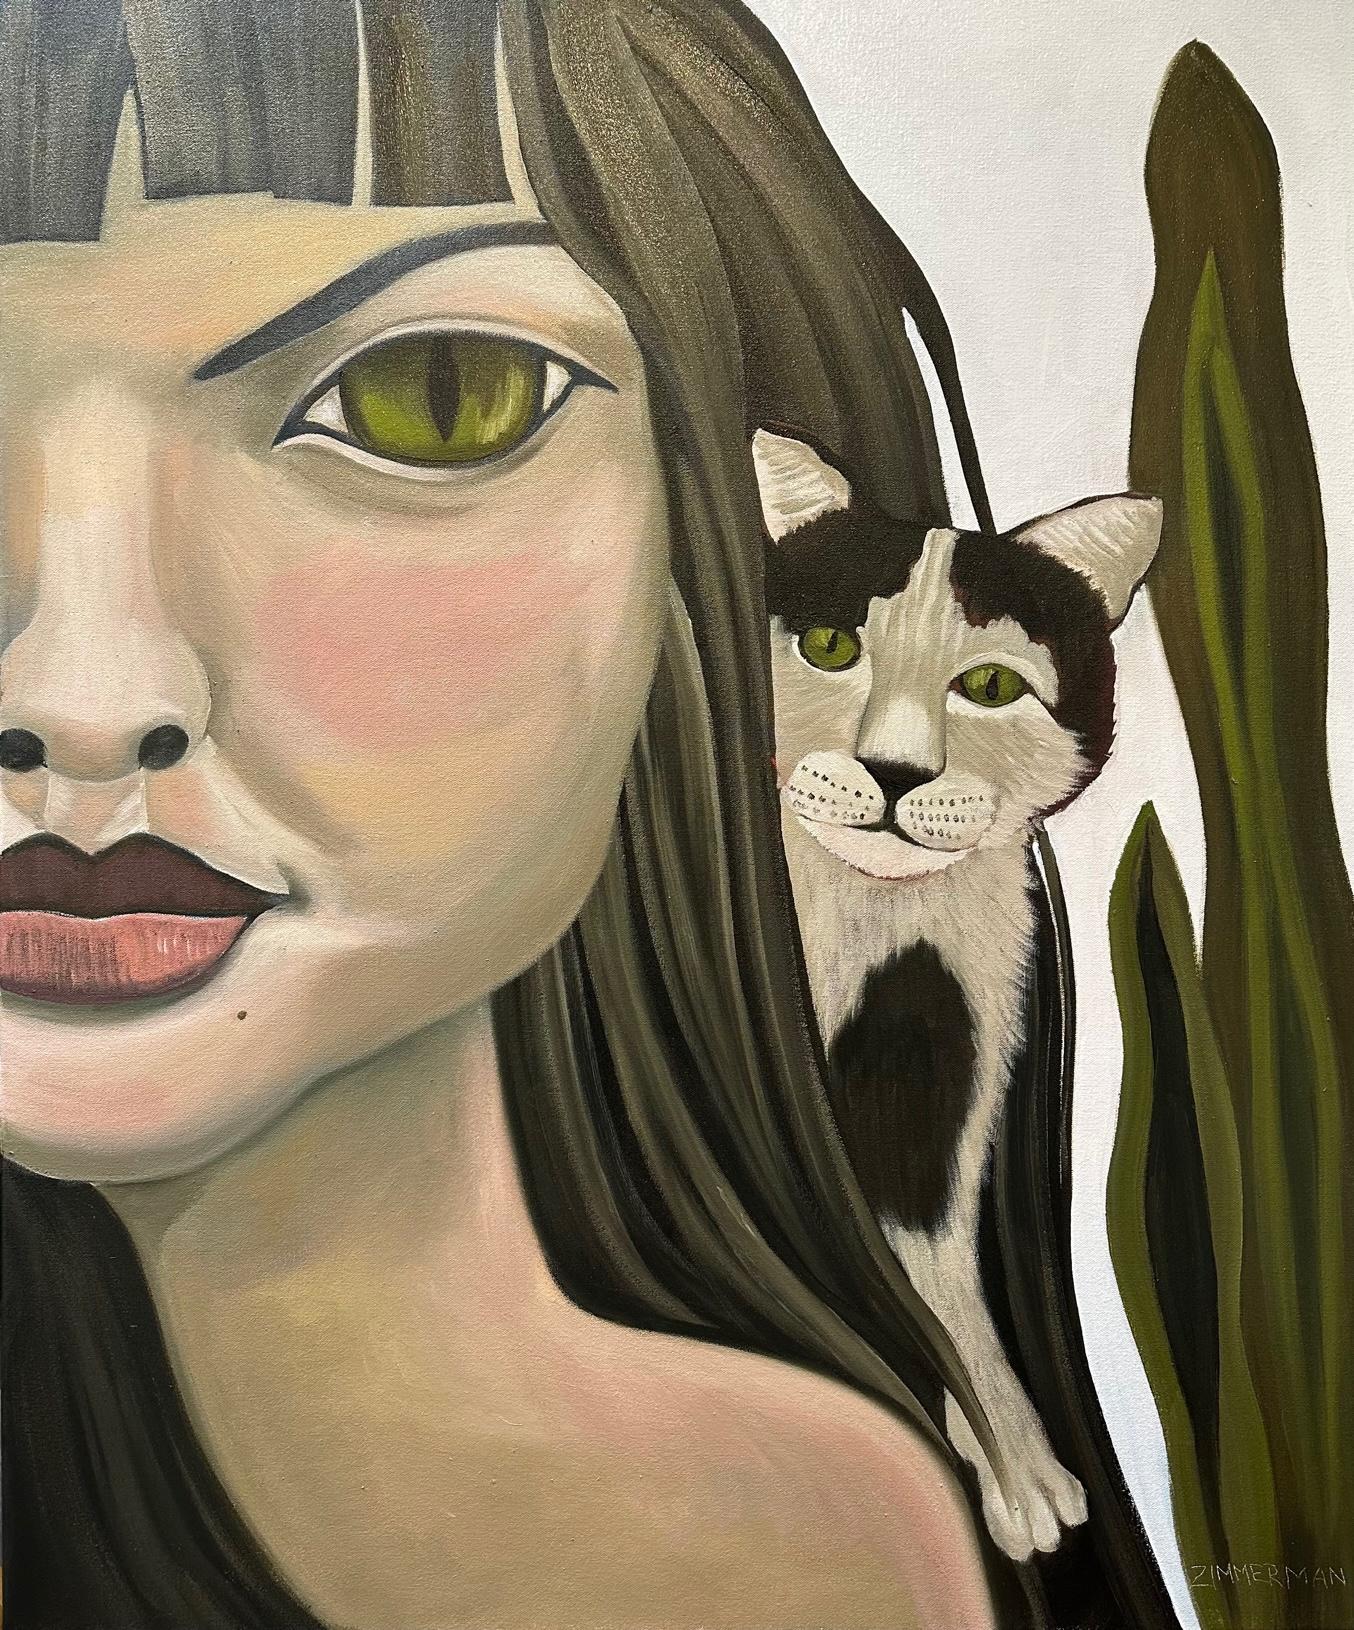 The Cats Meow - Animal Painting - oil on canvas by Marc Zimmerman

This masterpiece is exhibited in the Zimmerman Gallery, Carmel CA.


Marc Zimmerman creates playful paintings, whether deep mysterious jungle or delightfully whimsical florals. His